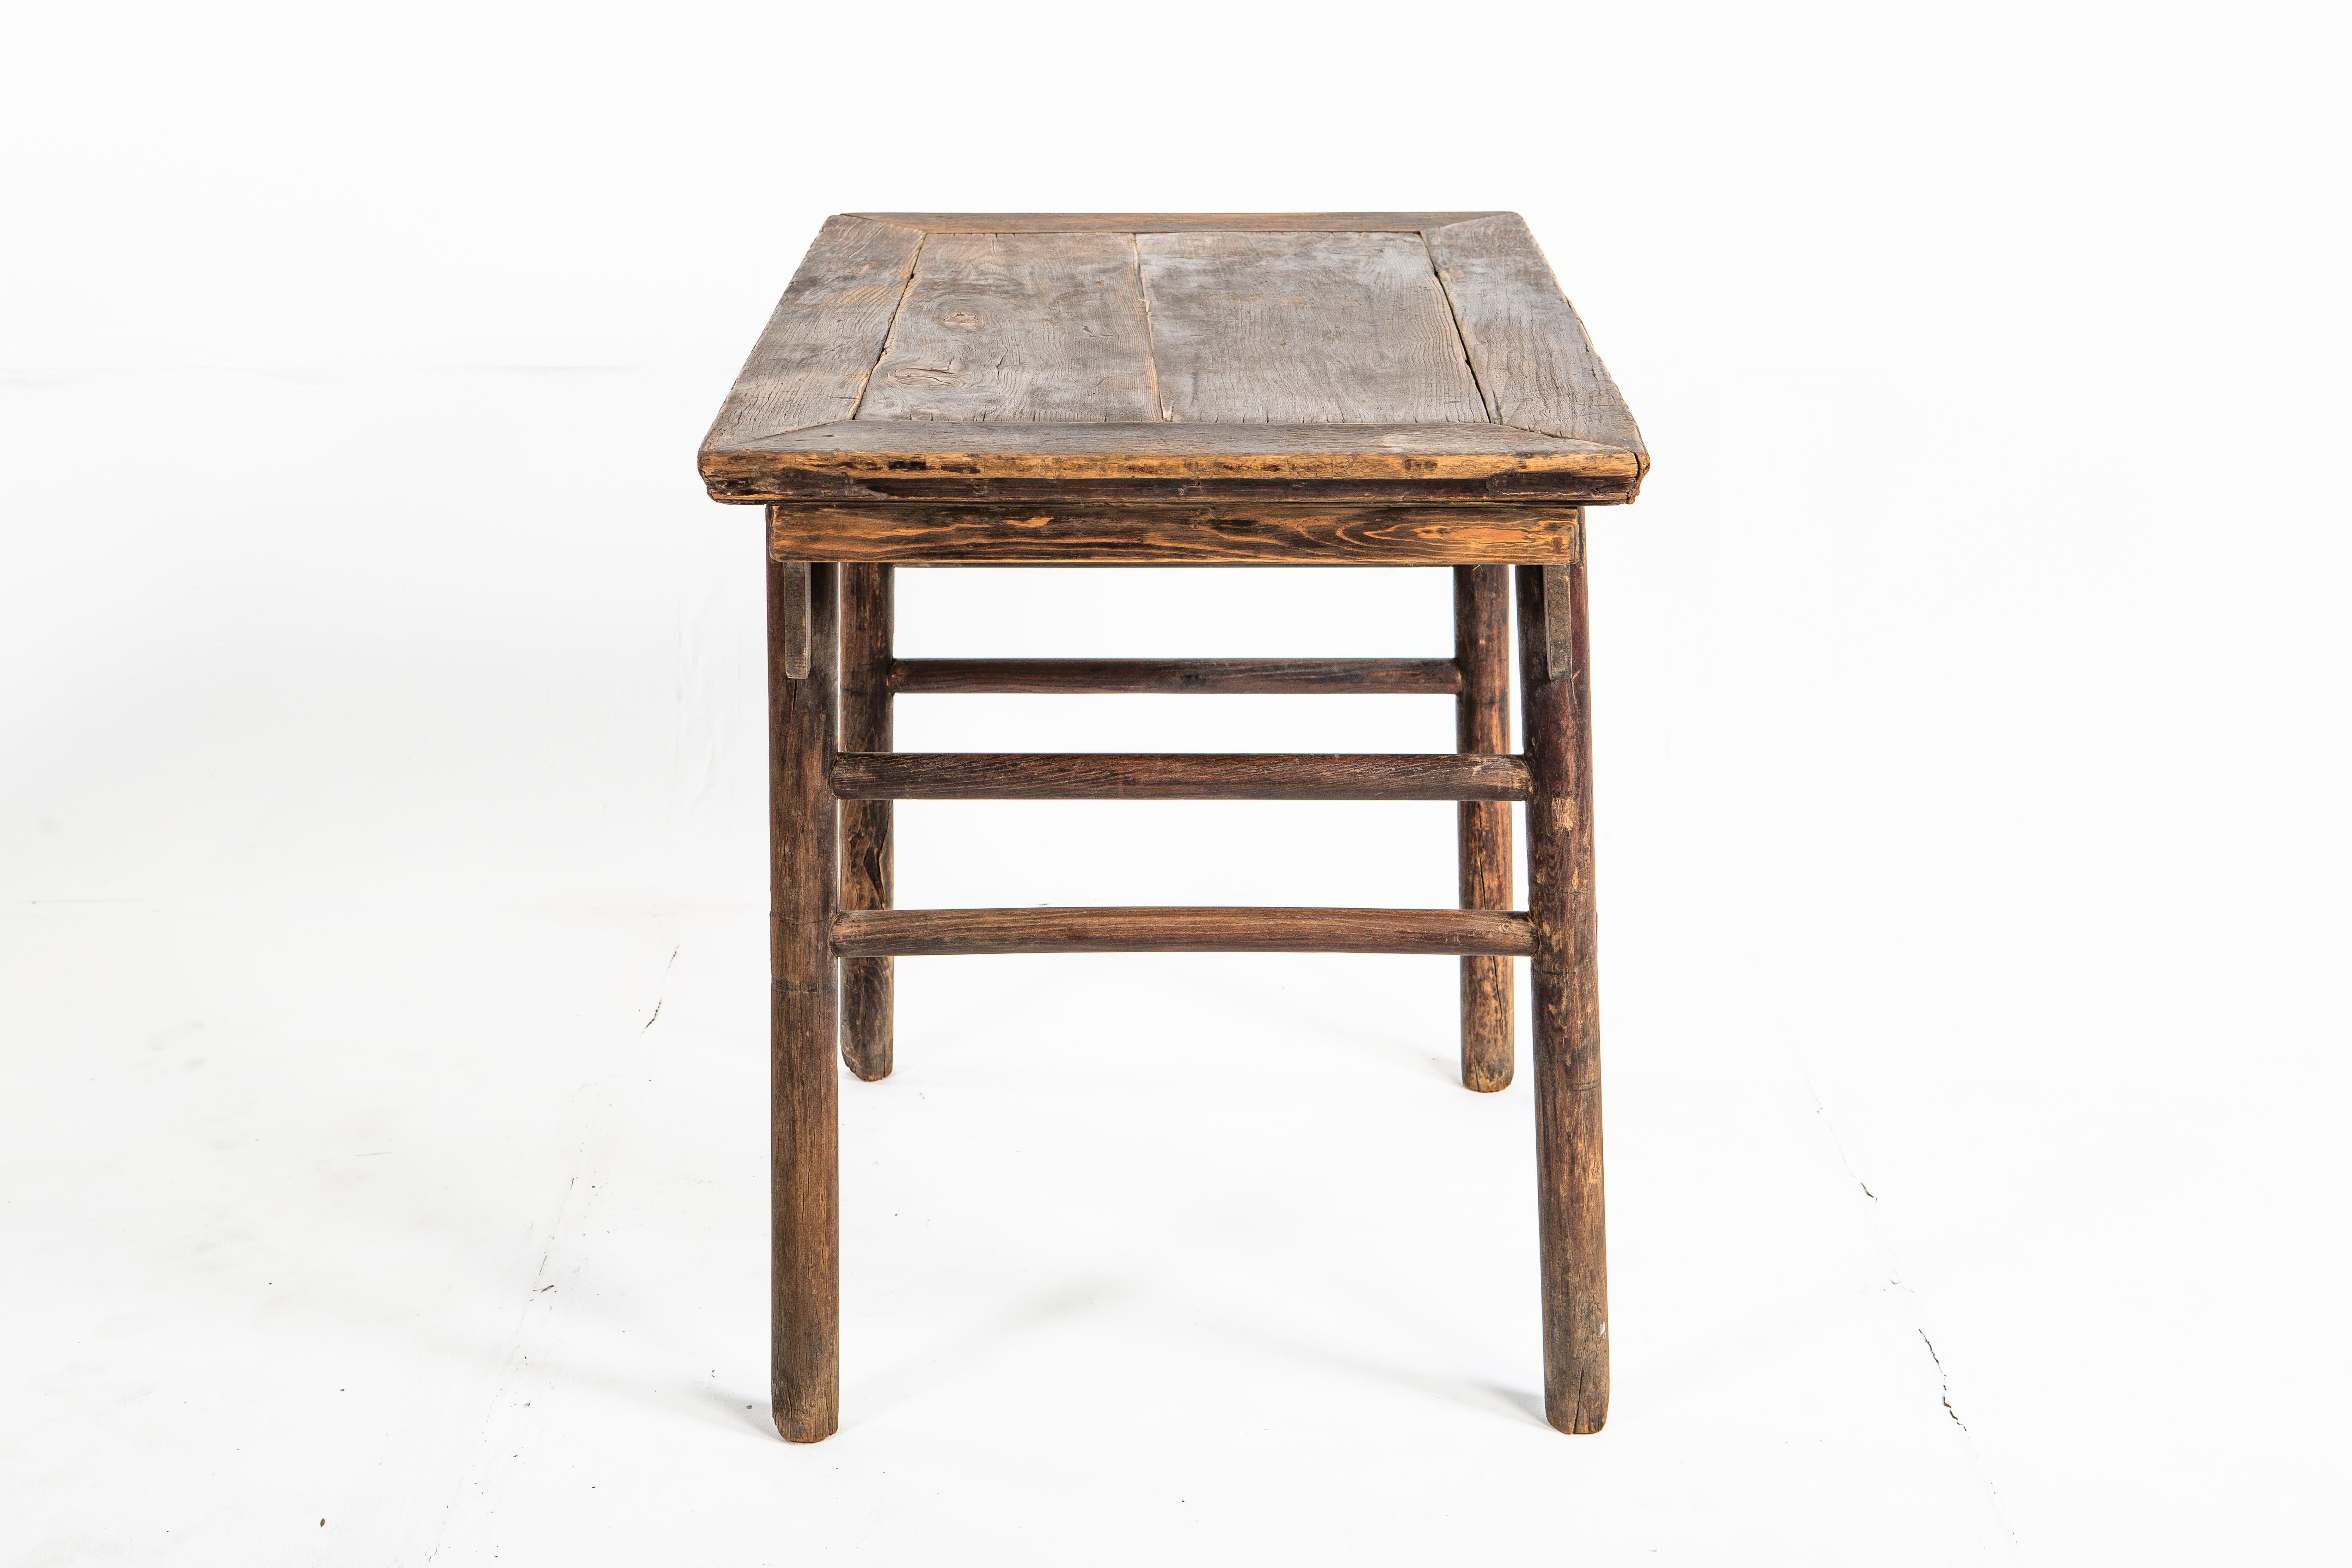 Elm Early Qing Dynasty Painting Table